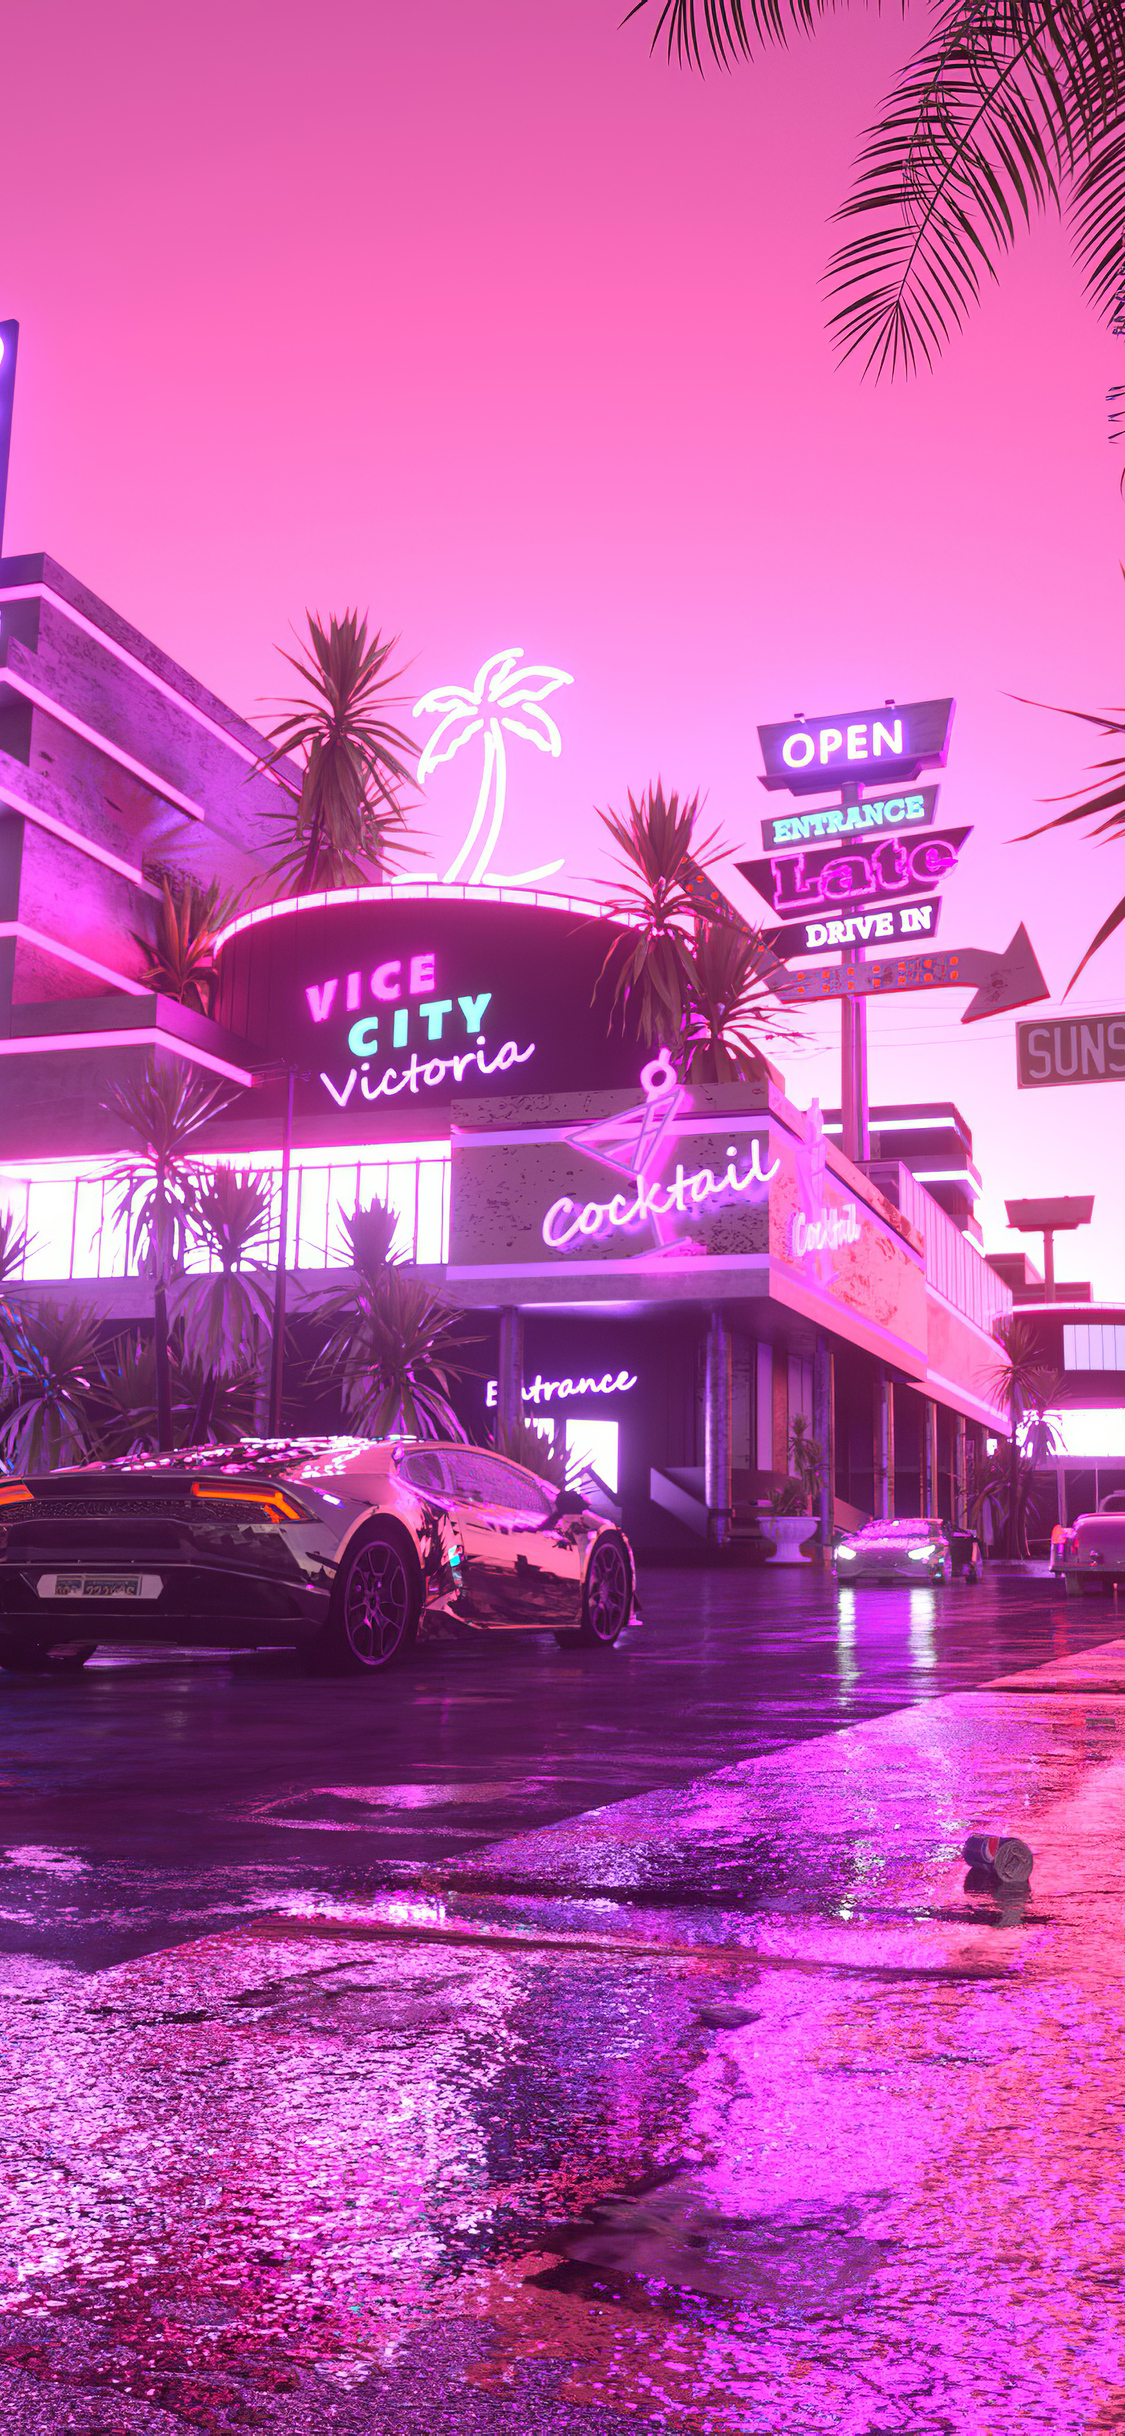 Vice city wallpaper for mobiles and tablets - City